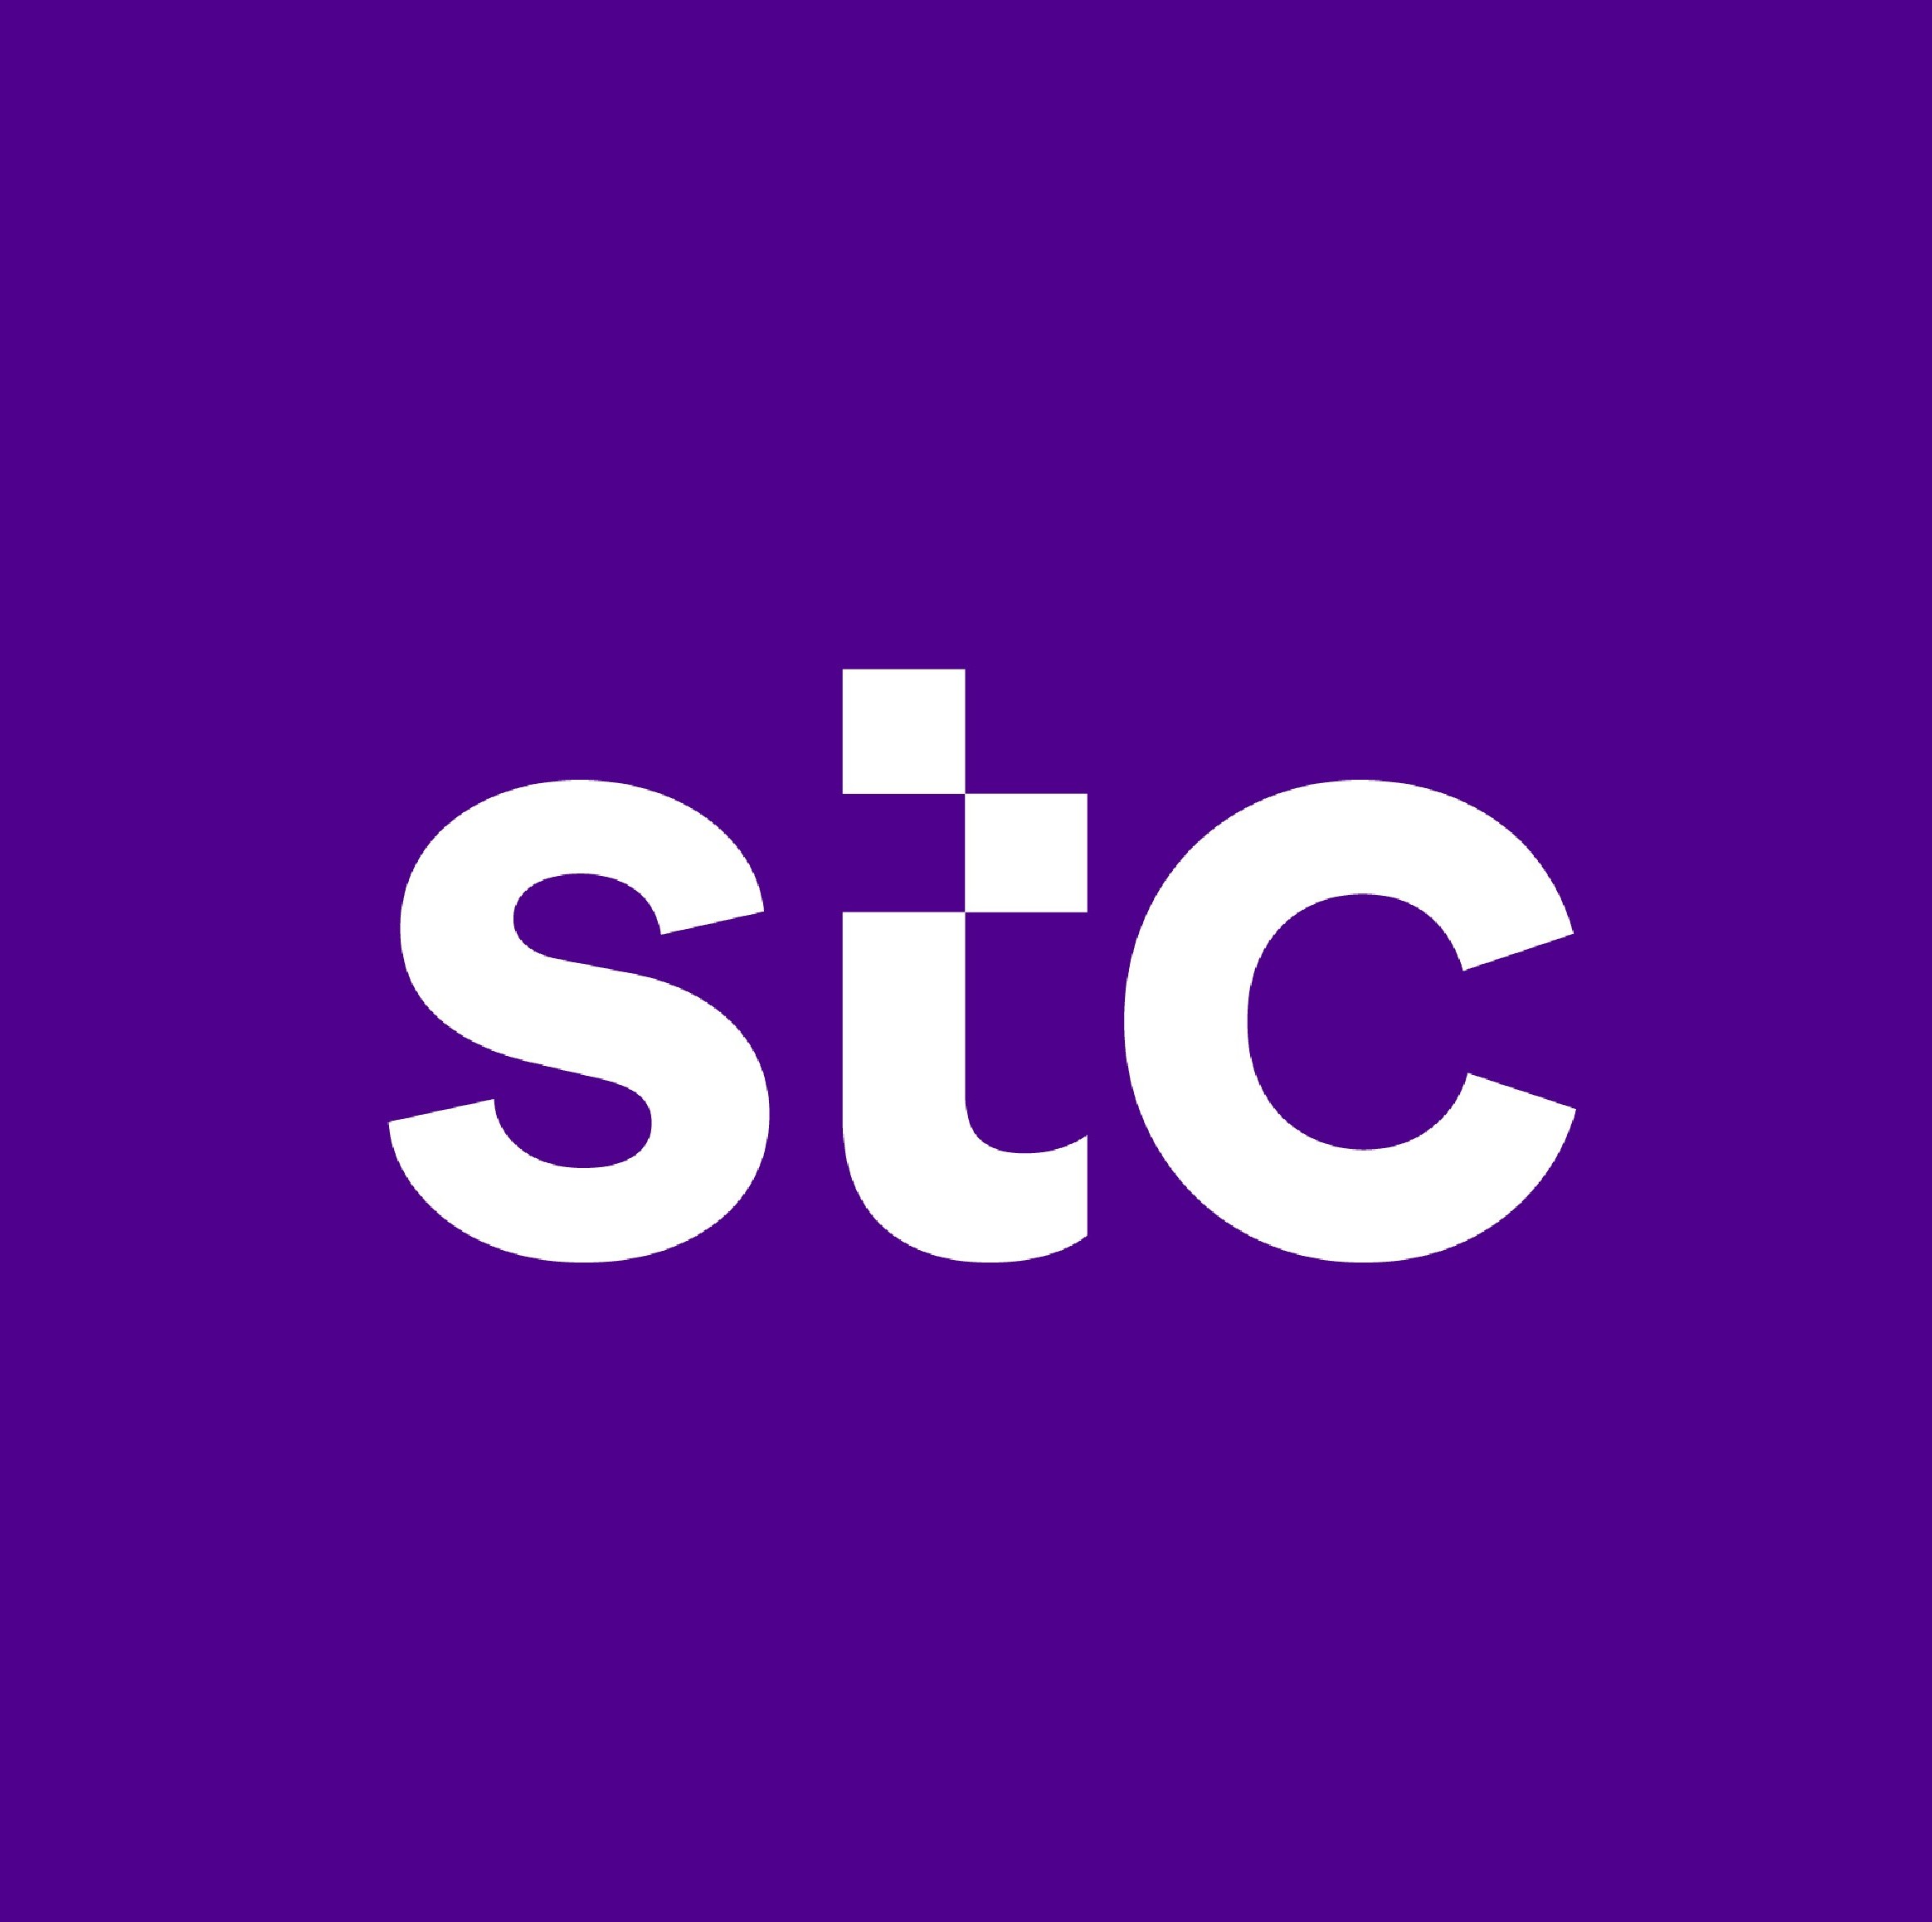 stc employs its resources to empower 479 charities through more than 1,300 digital services image